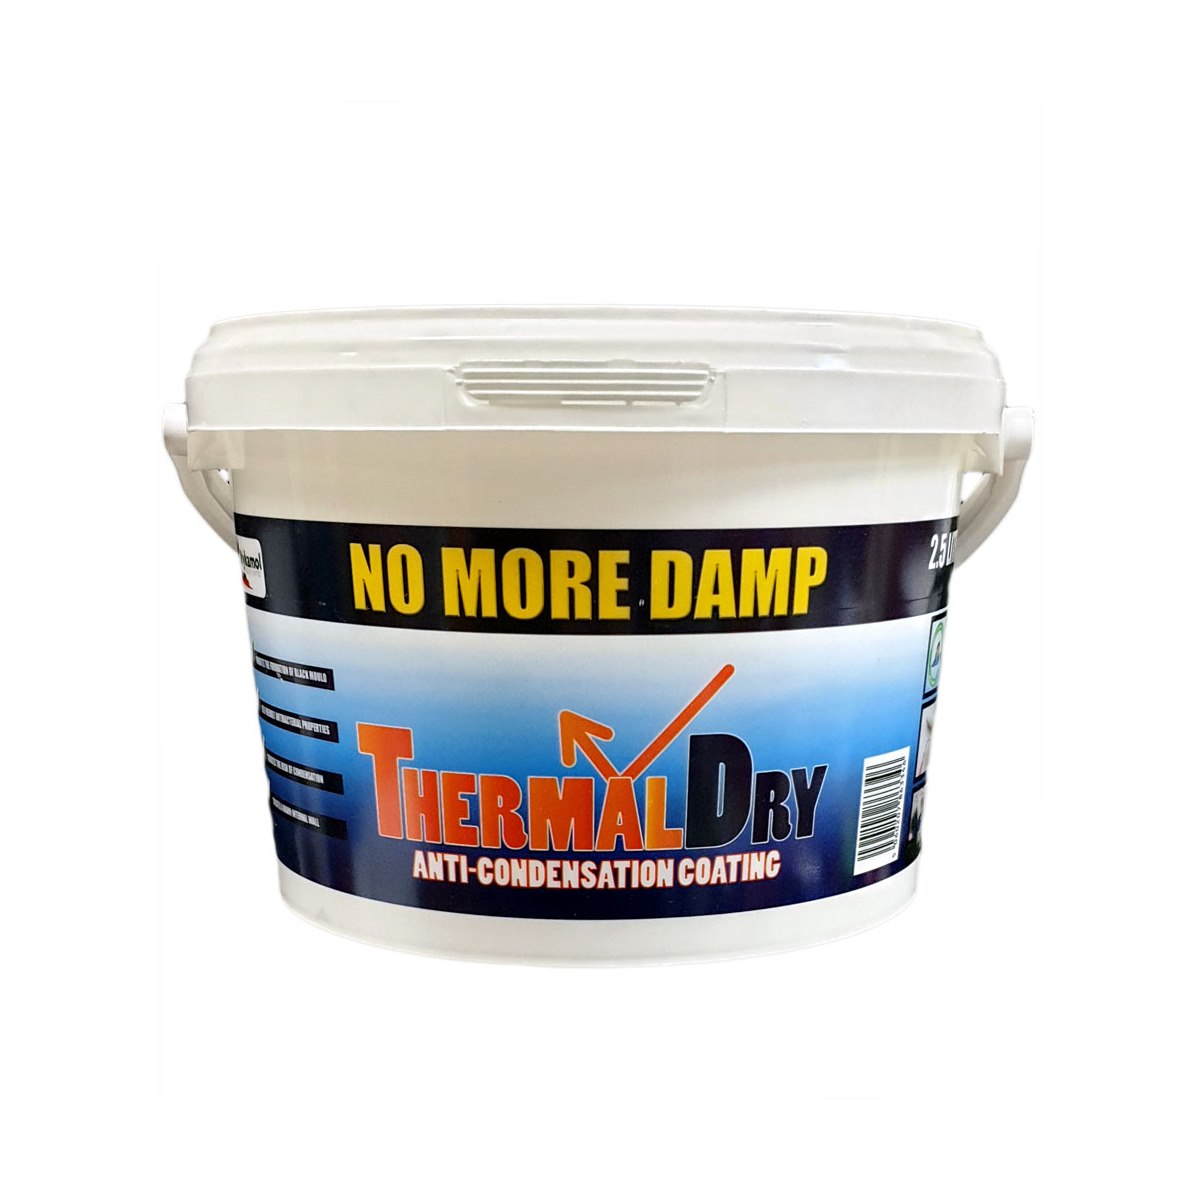 Wykamol Thermaldry Anti-Condensation Coating Paint White 2.5 Litre